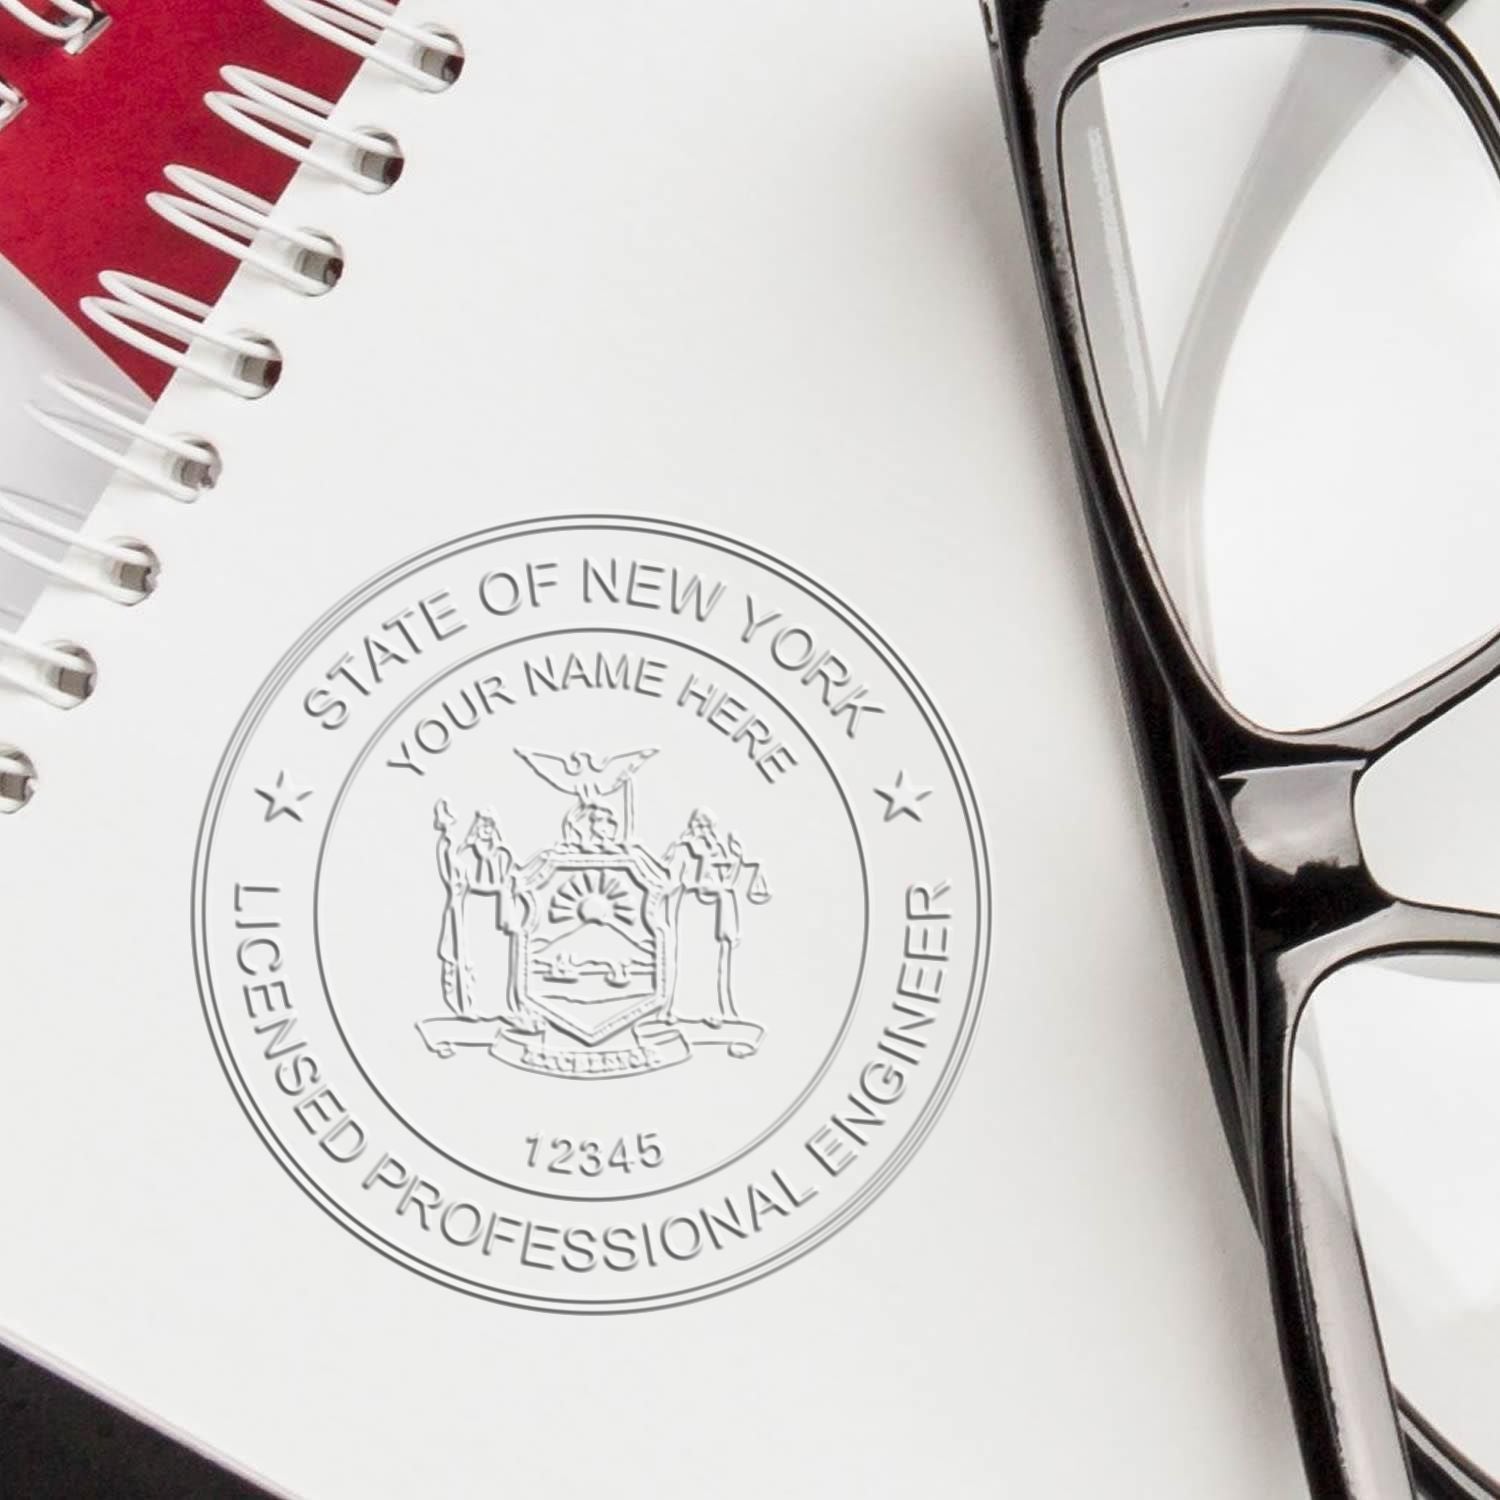 An alternative view of the State of New York Extended Long Reach Engineer Seal stamped on a sheet of paper showing the image in use